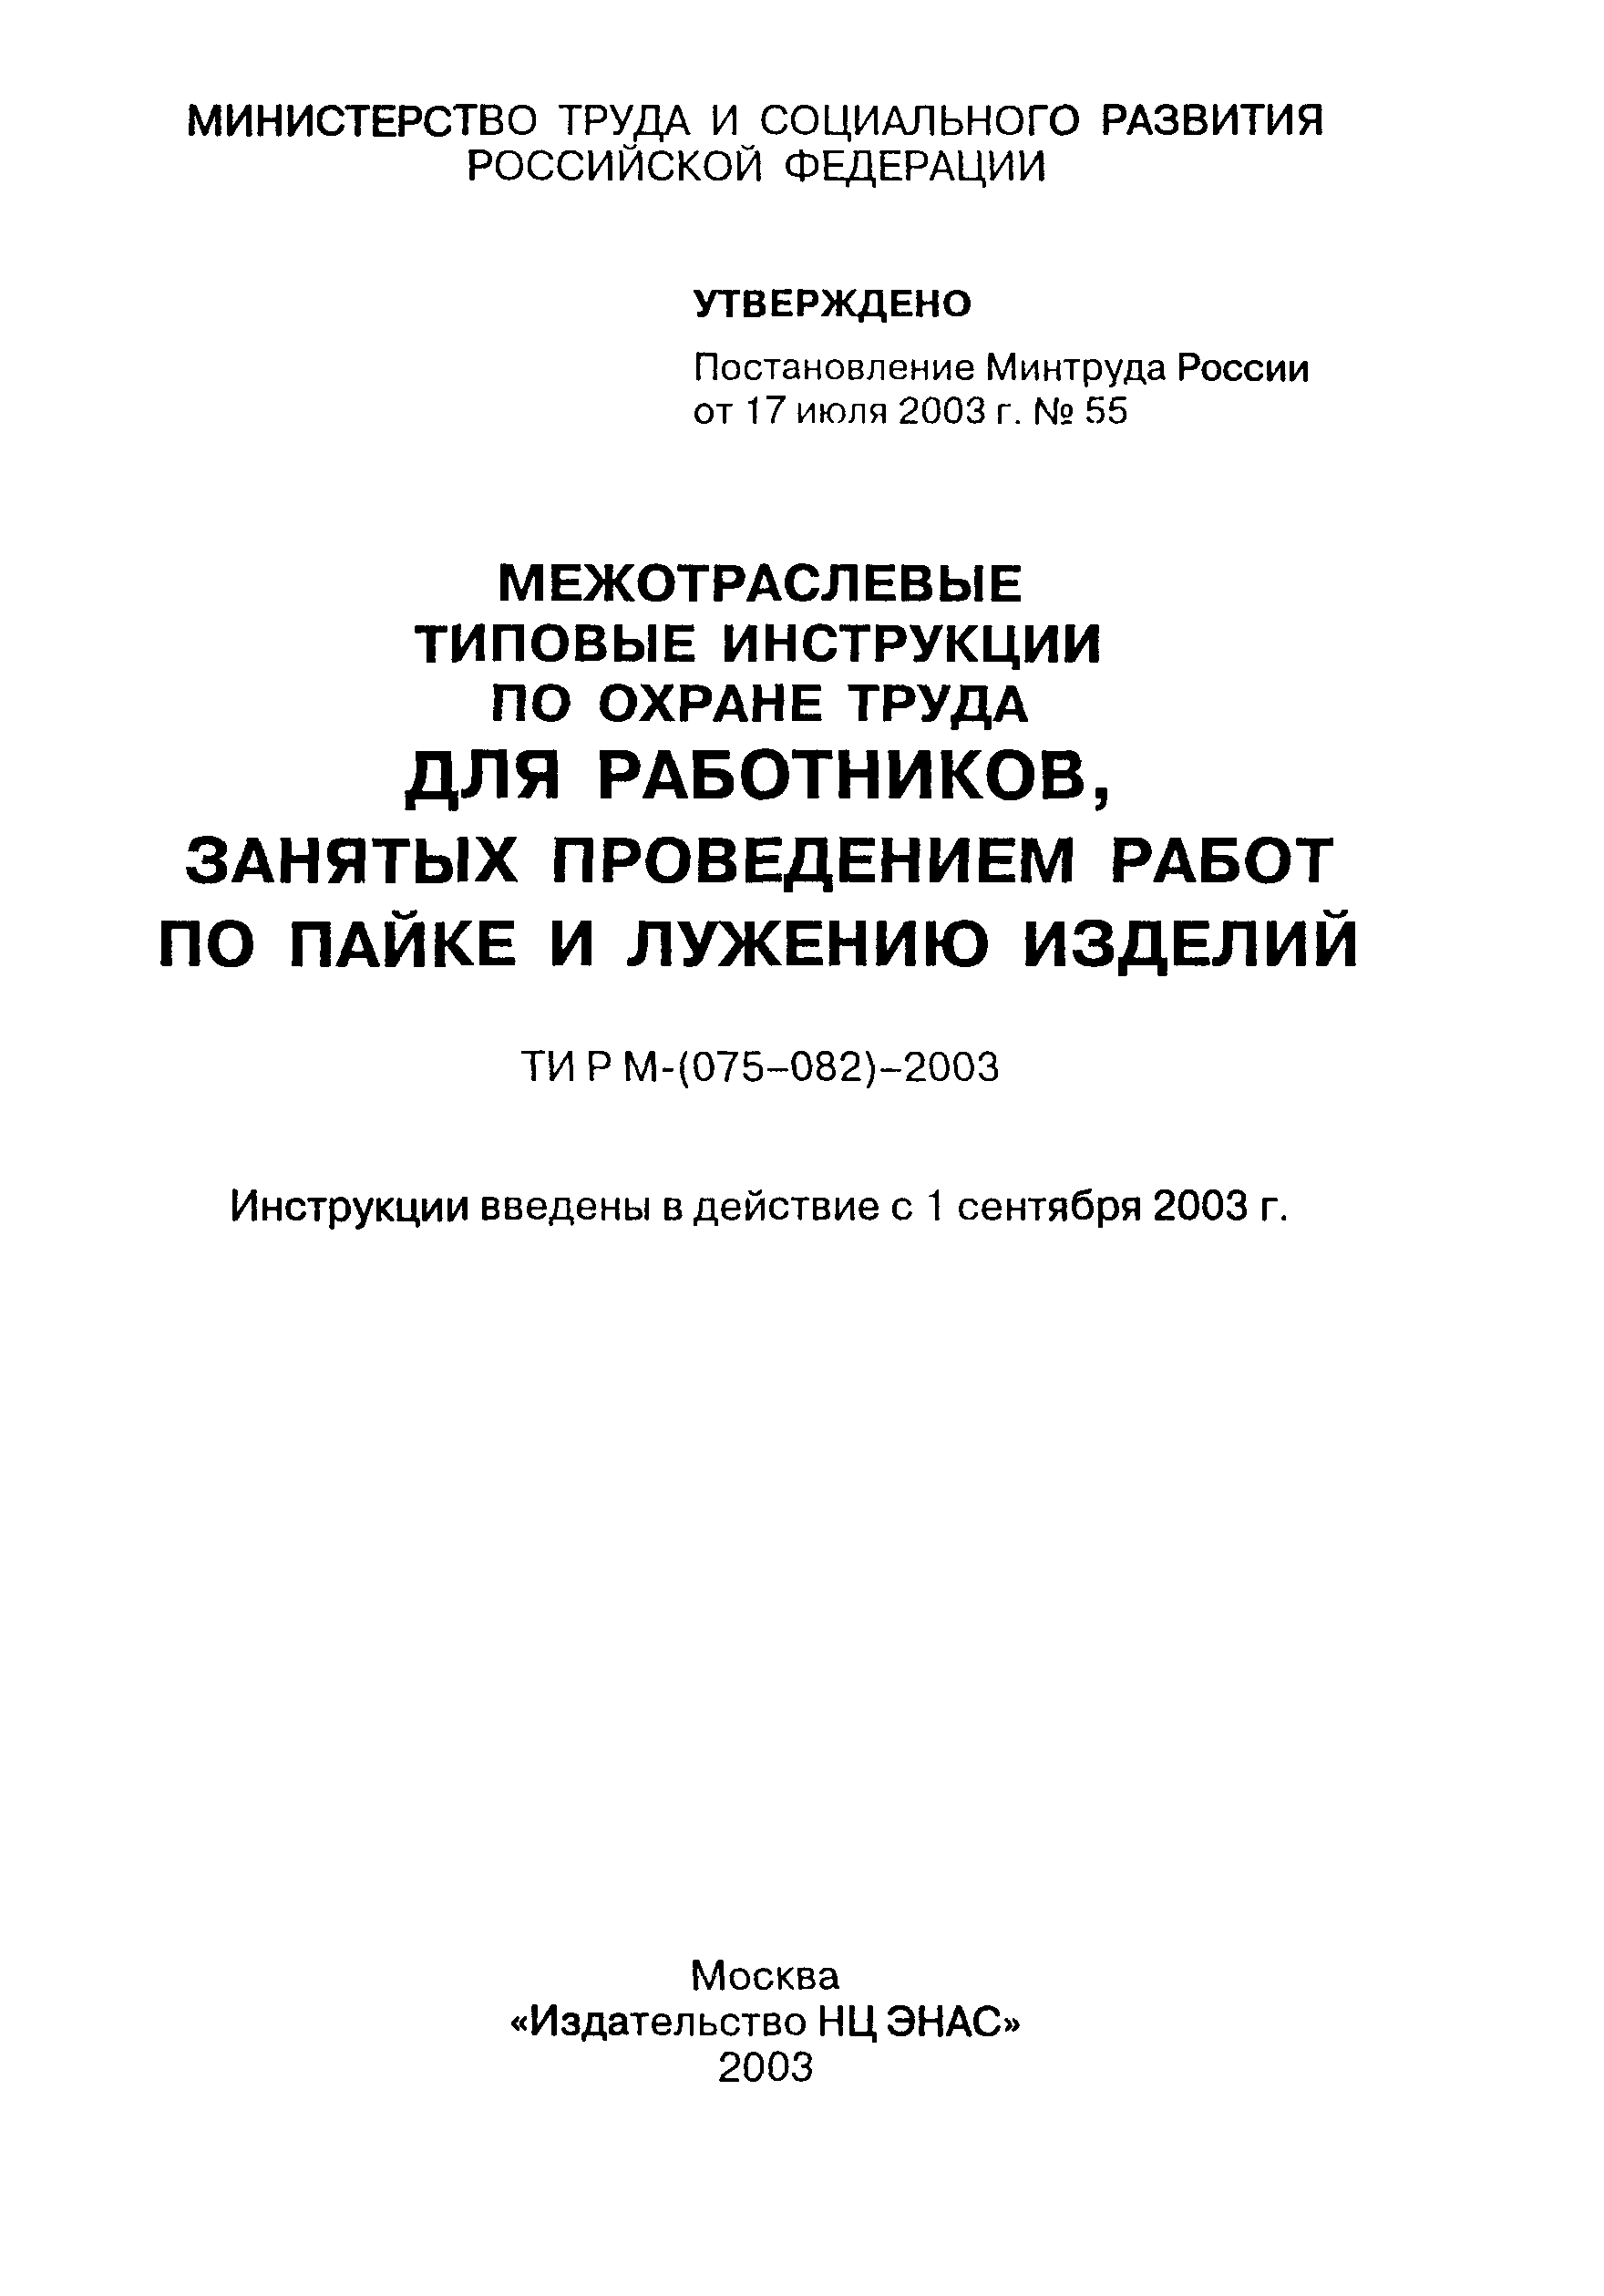 ТИ Р М-081-2003